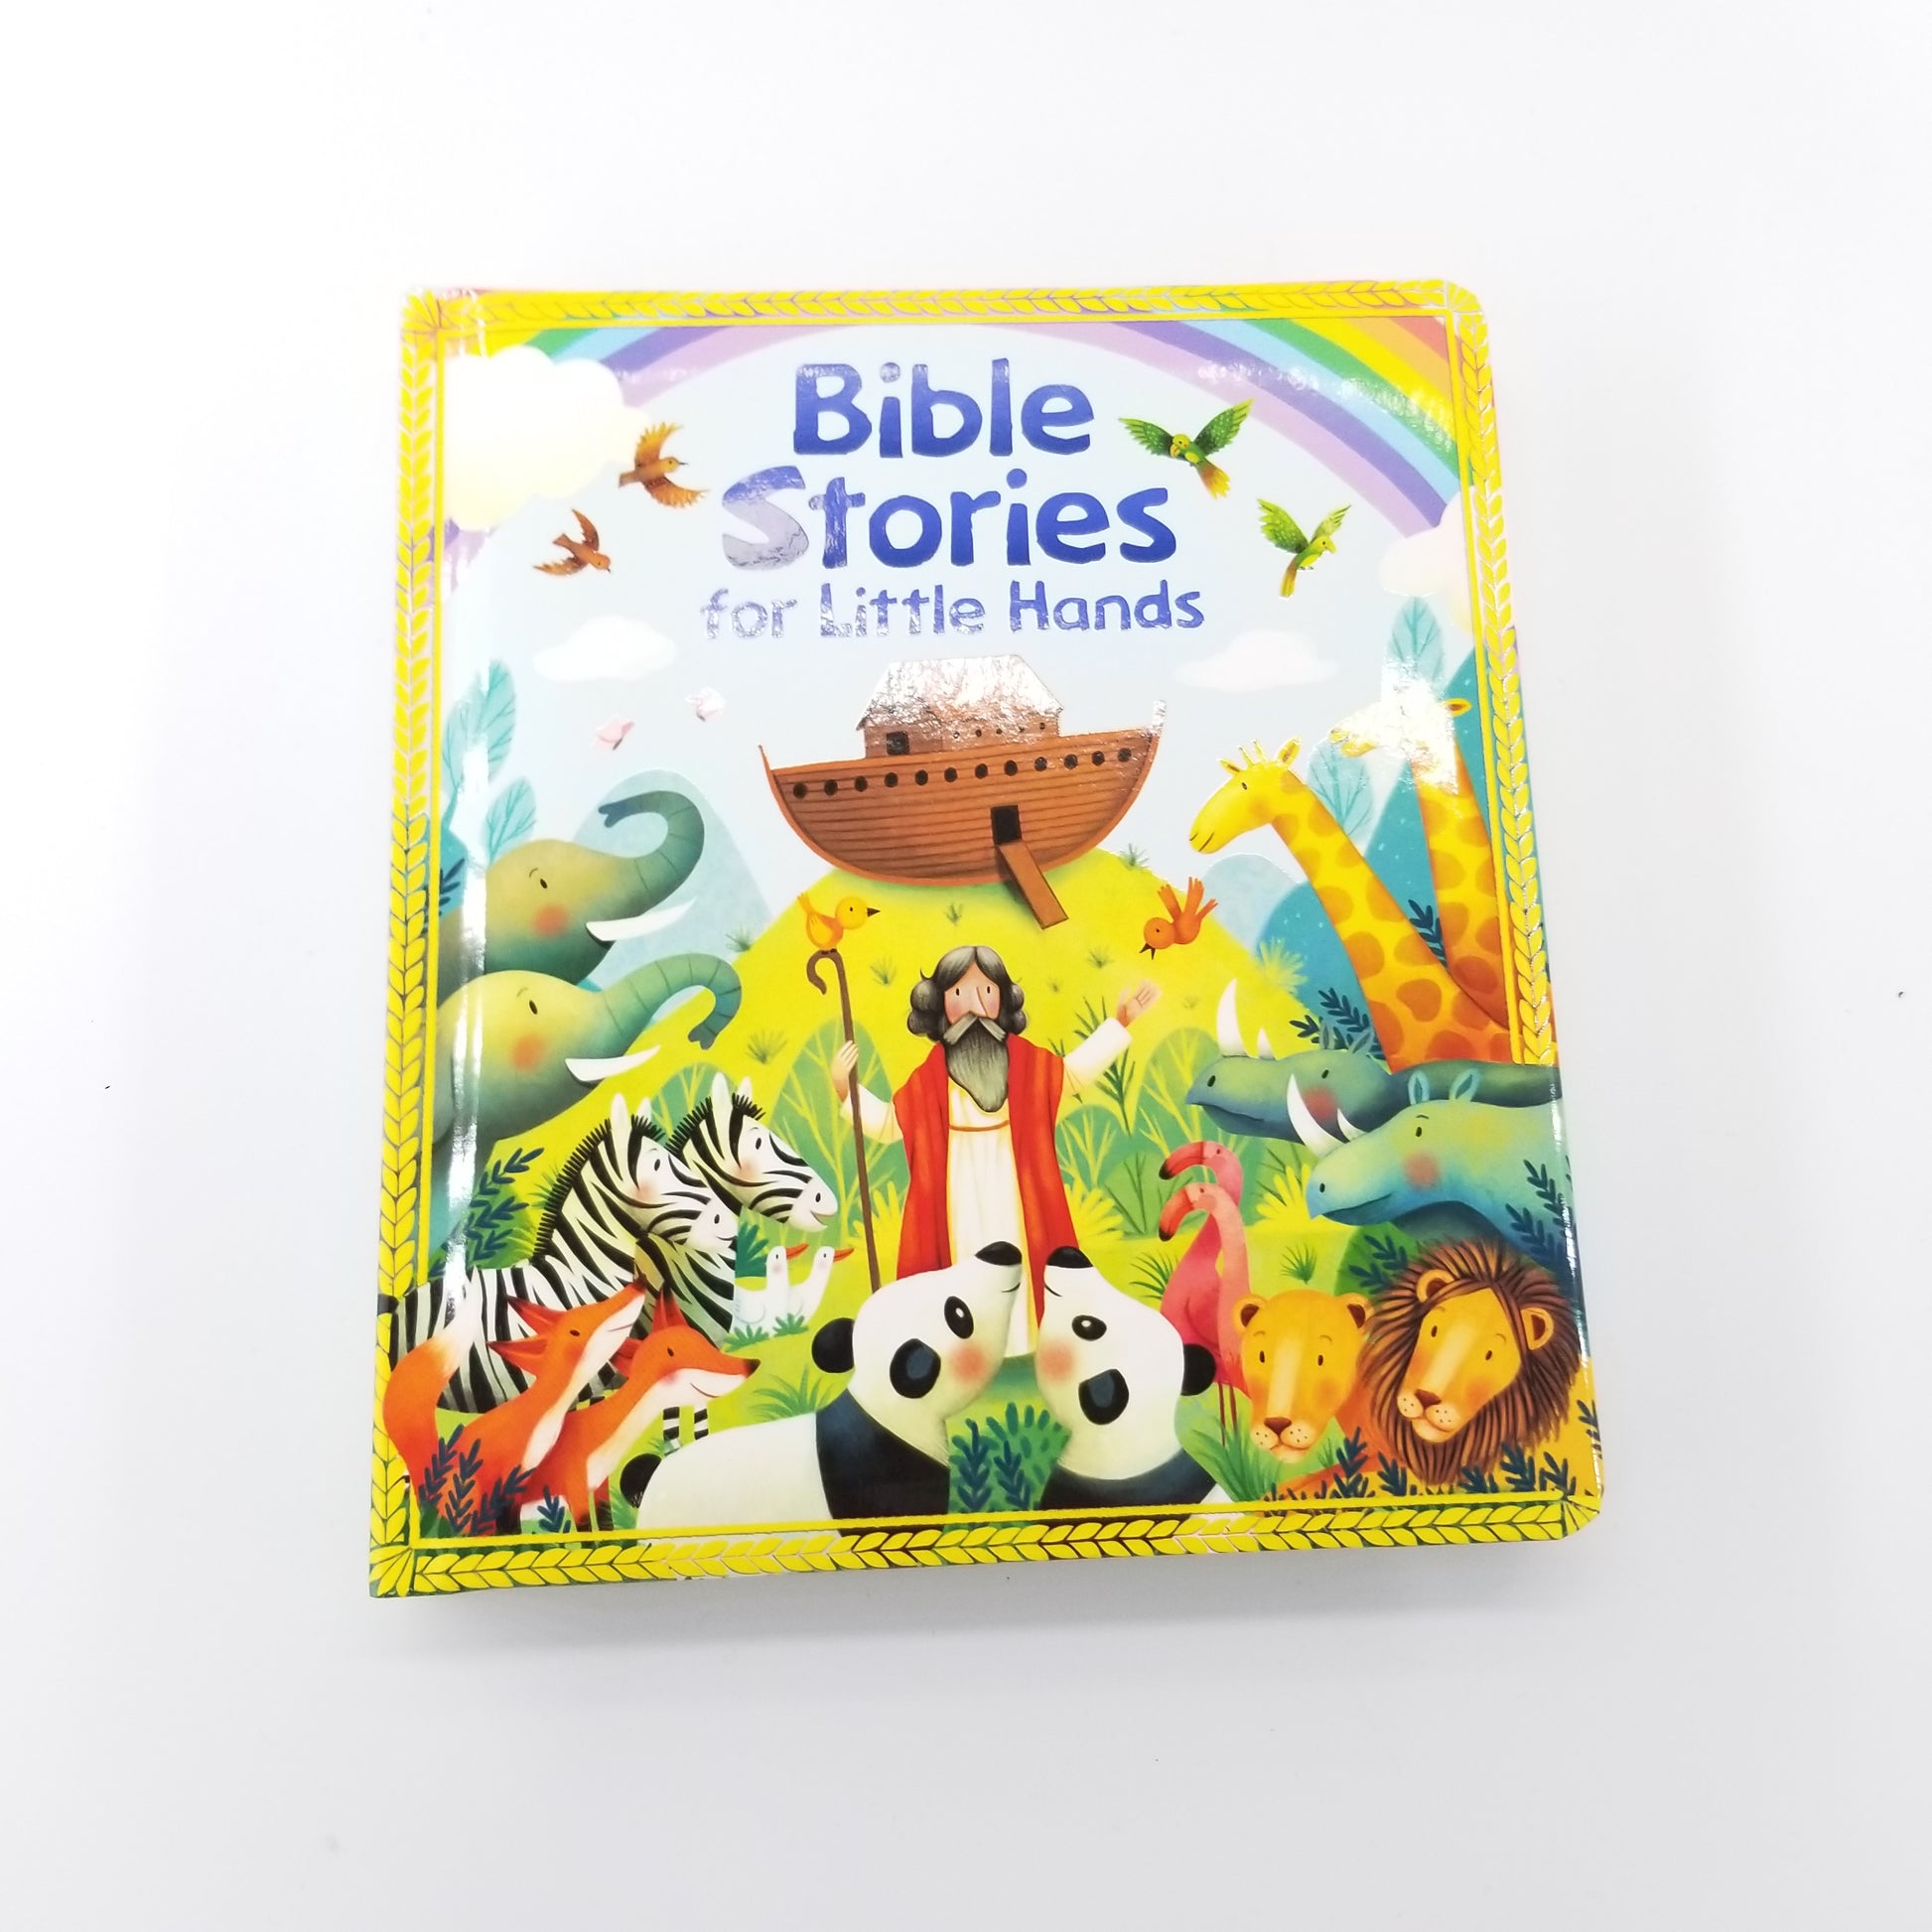 Bible stories for kids' books